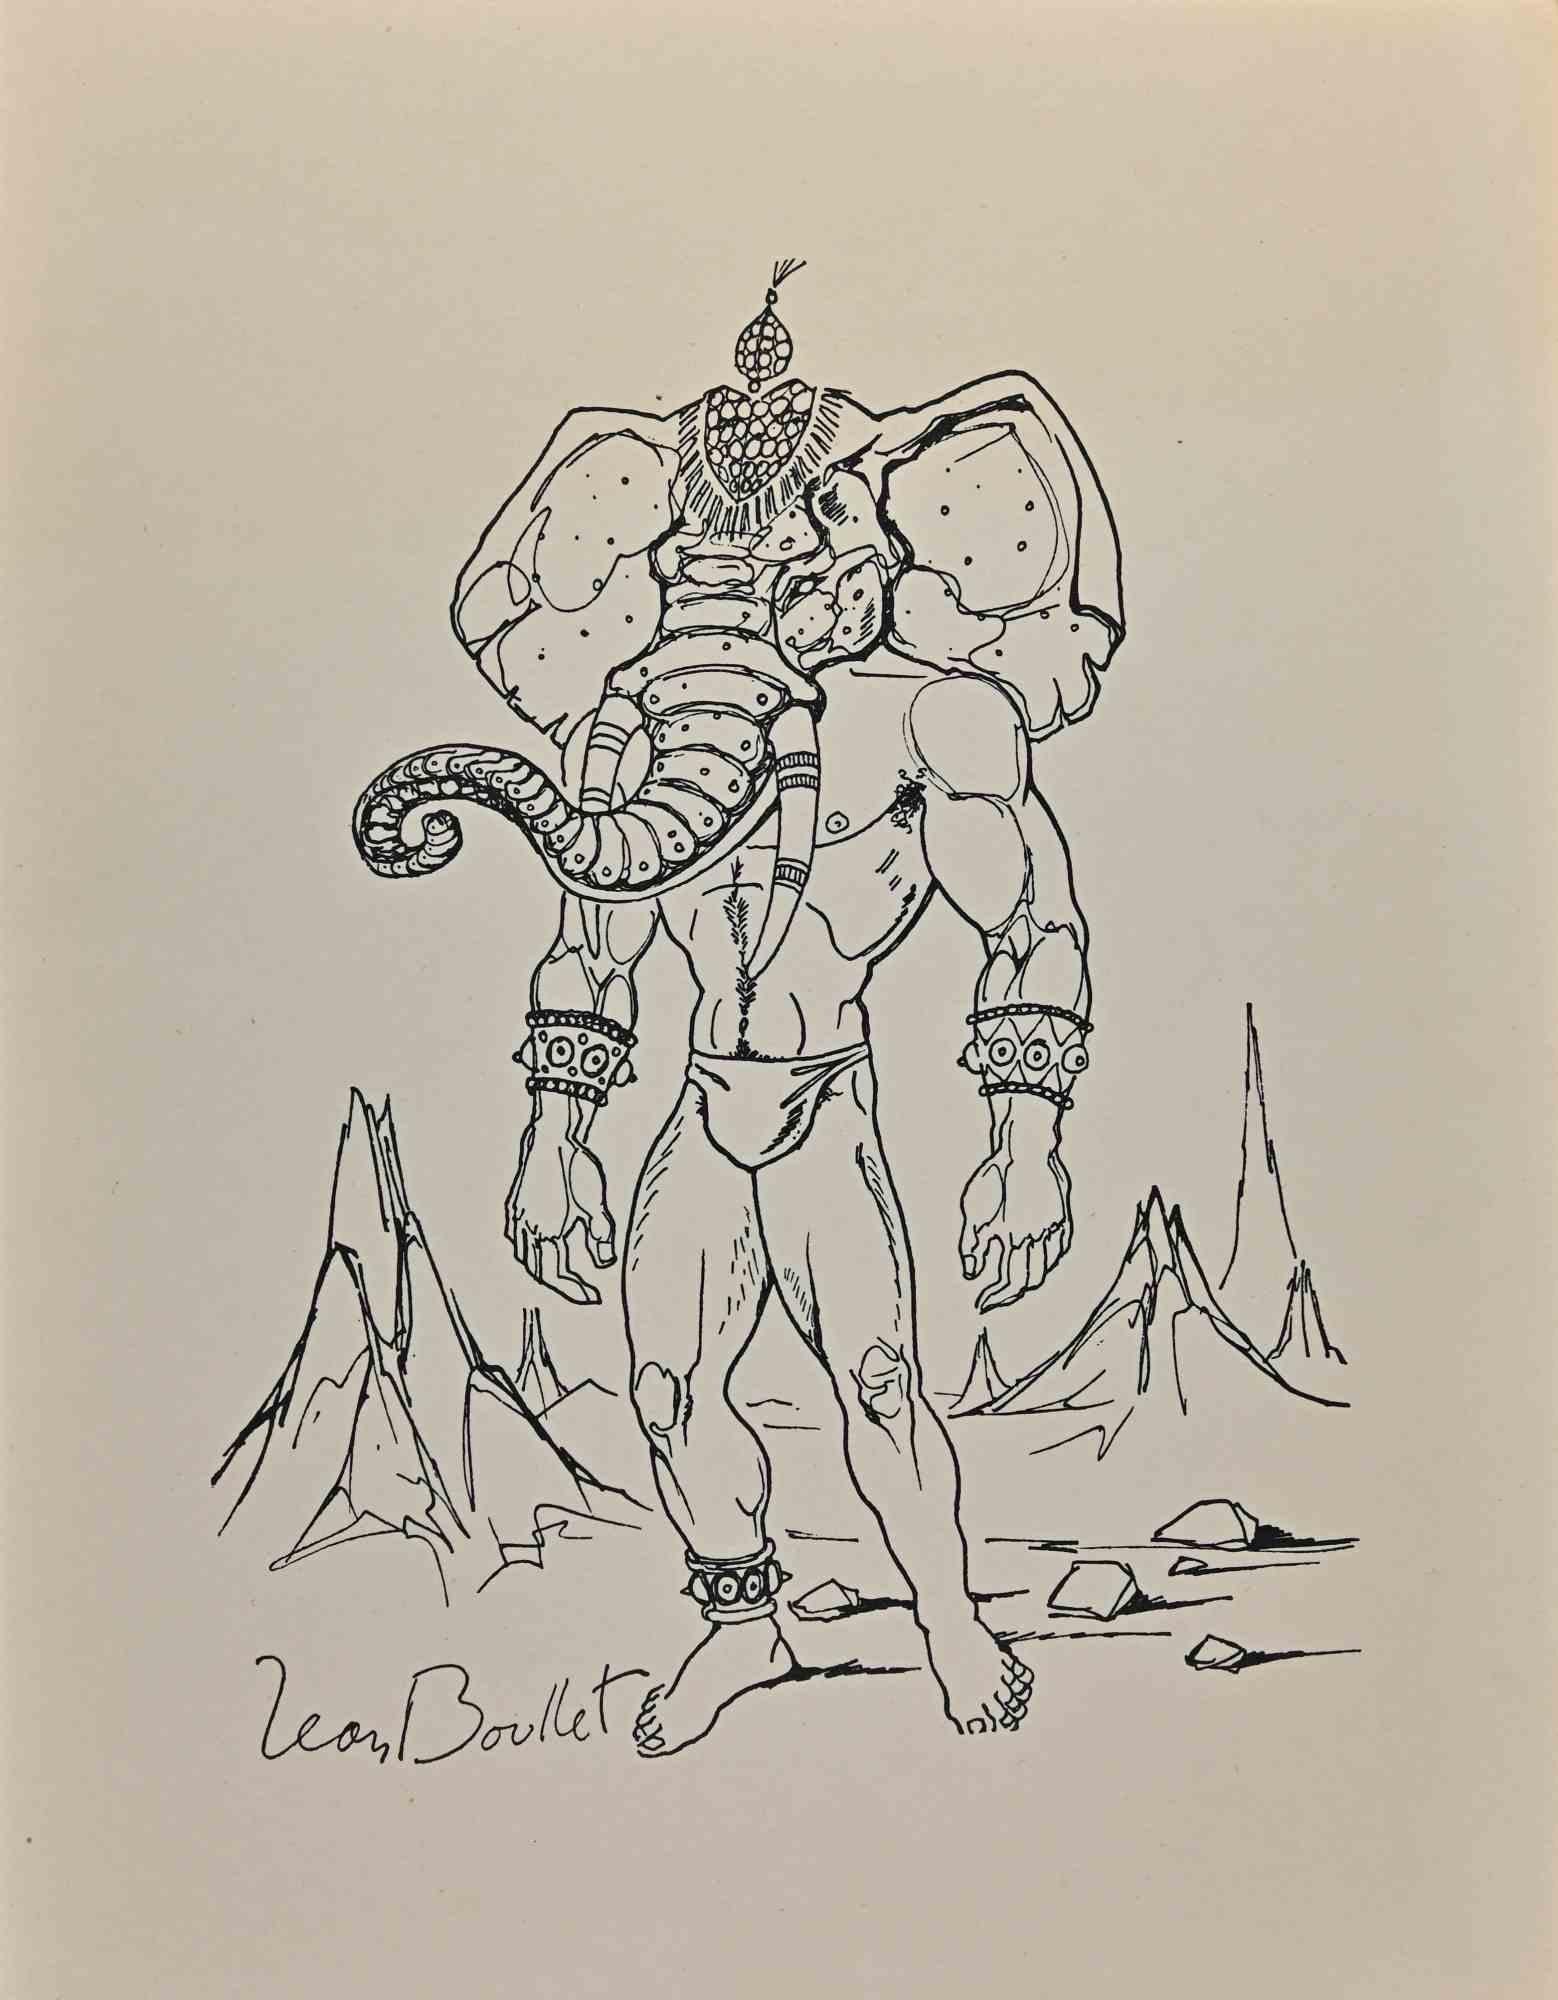 Elephant Man - Metamorphosis is an original lithograph realized in the 1950s by Leon Boullet (1921-1970).

Good conditions.

Signed on the plate.

The artwork is depicted by strong strokes in a well-balanced composition.